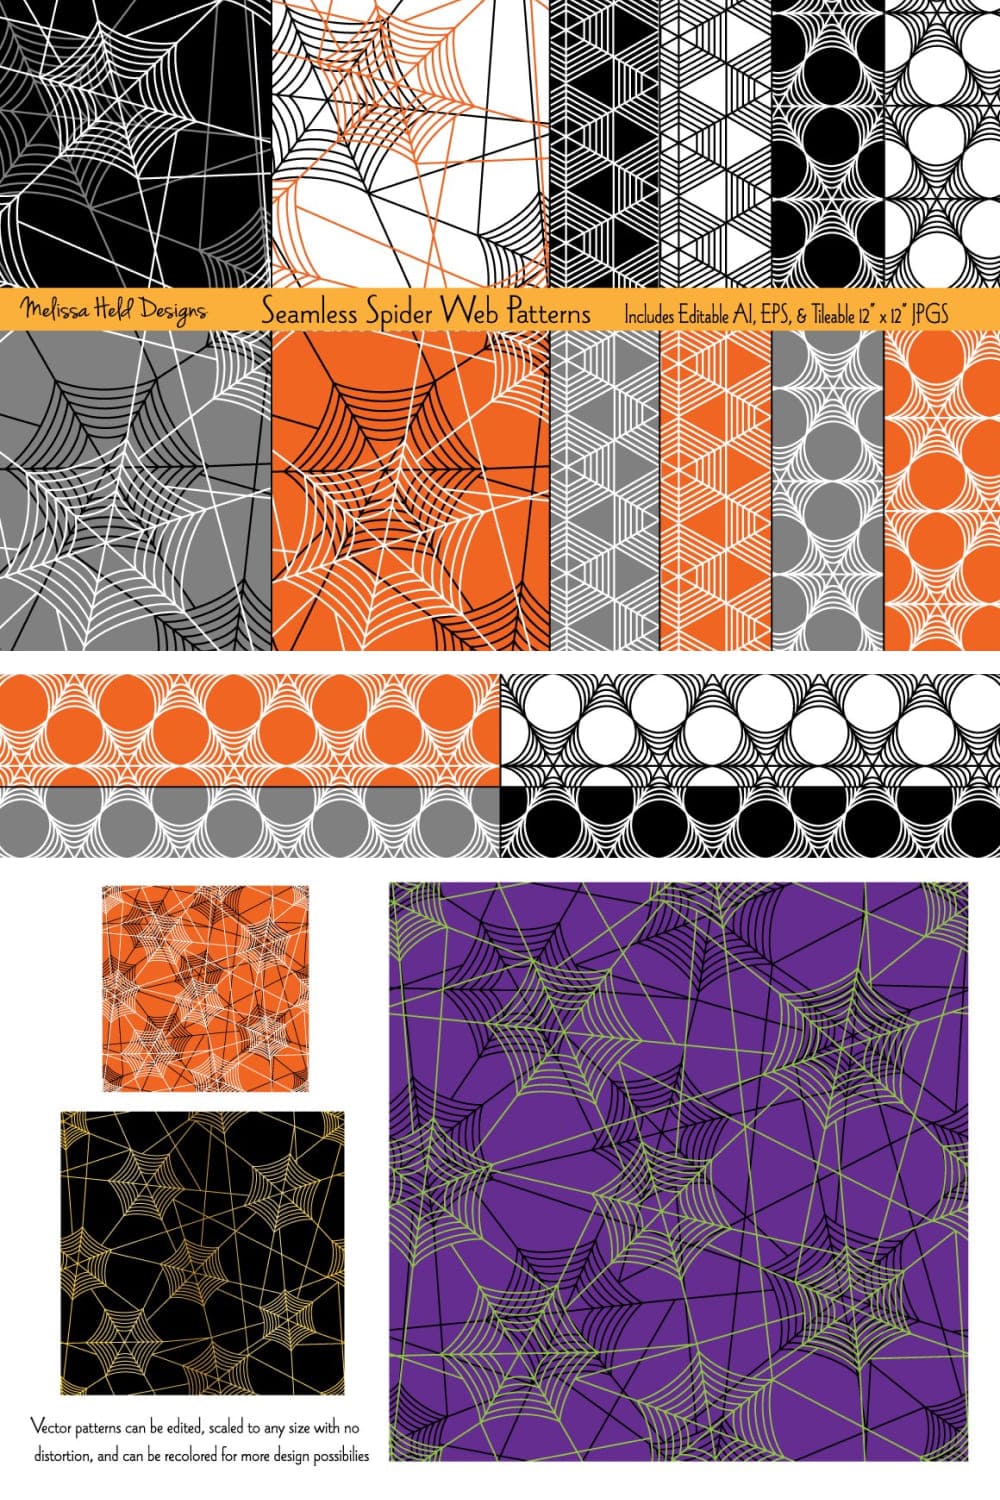 Seamless Halloween Spider Web Patterns - pinterest image preview.